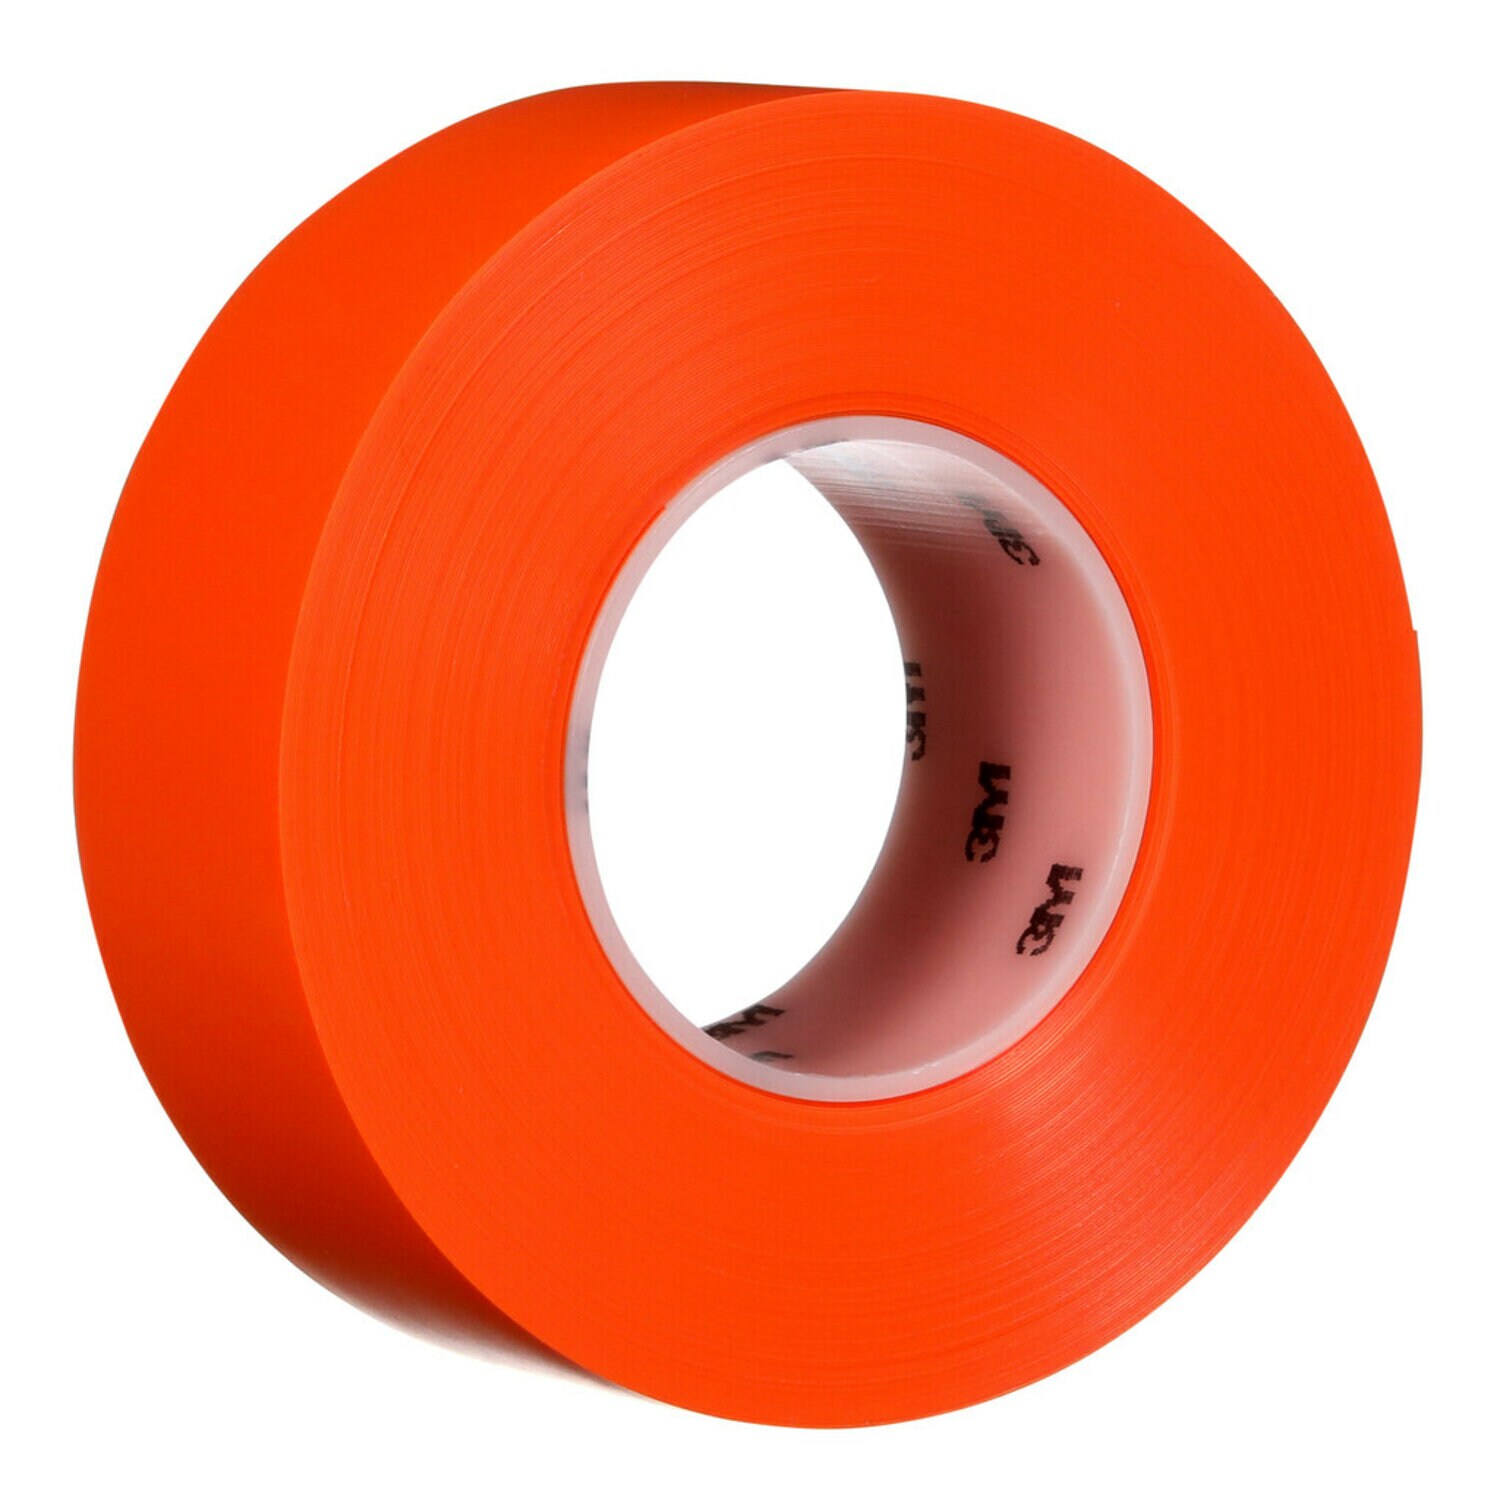 7100260621 - 3M Durable Floor Marking Tape 971, Orange, 2 in x 36 yd, 17 mil, 6 Rolls/Case, Individually Wrapped Conveniently Packaged